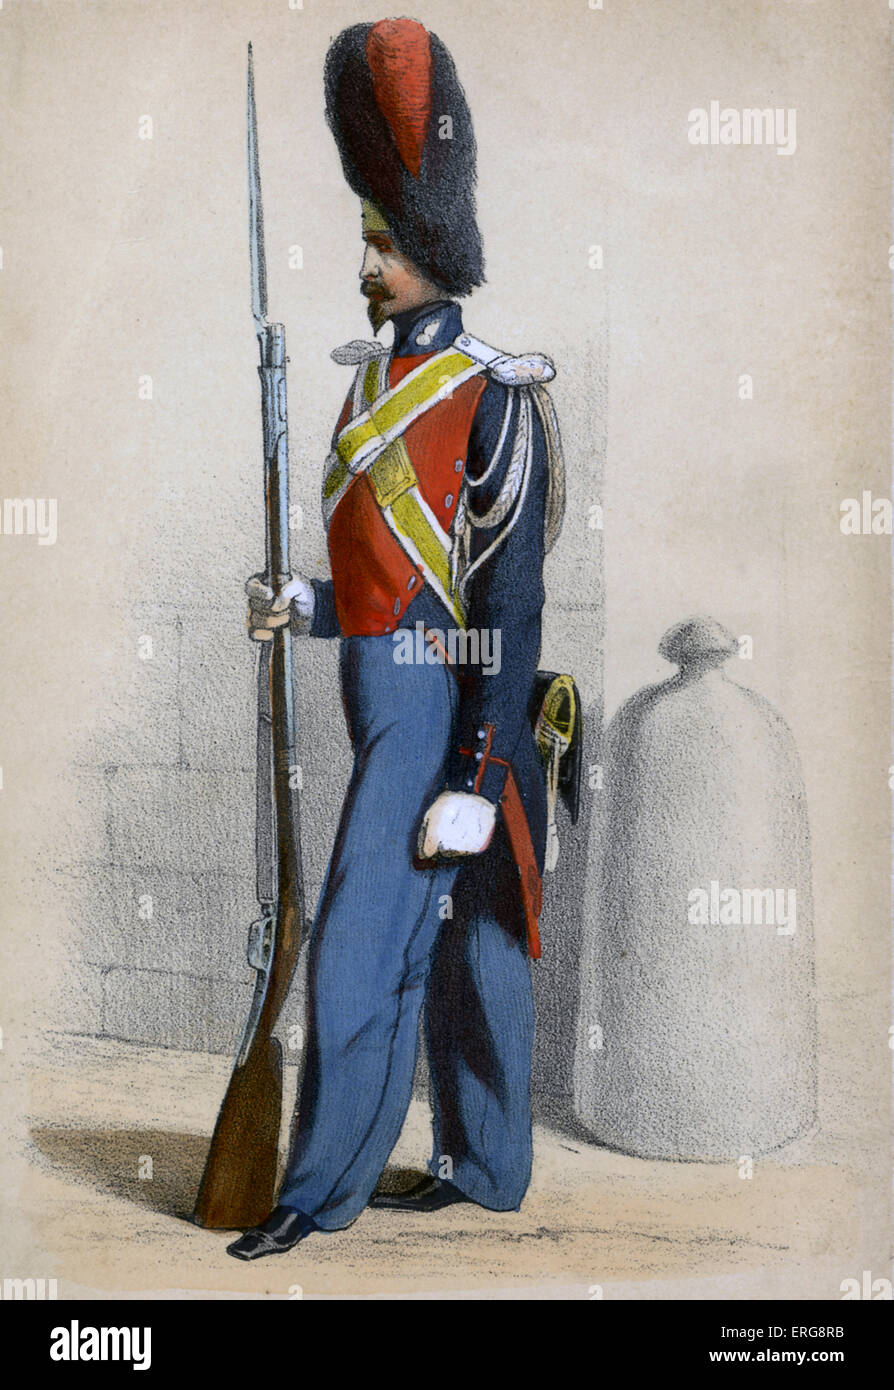 Gendarme d'élite: member of light cavalry units consisiting of young men of noble birth in the 19th century French Army. From Stock Photo